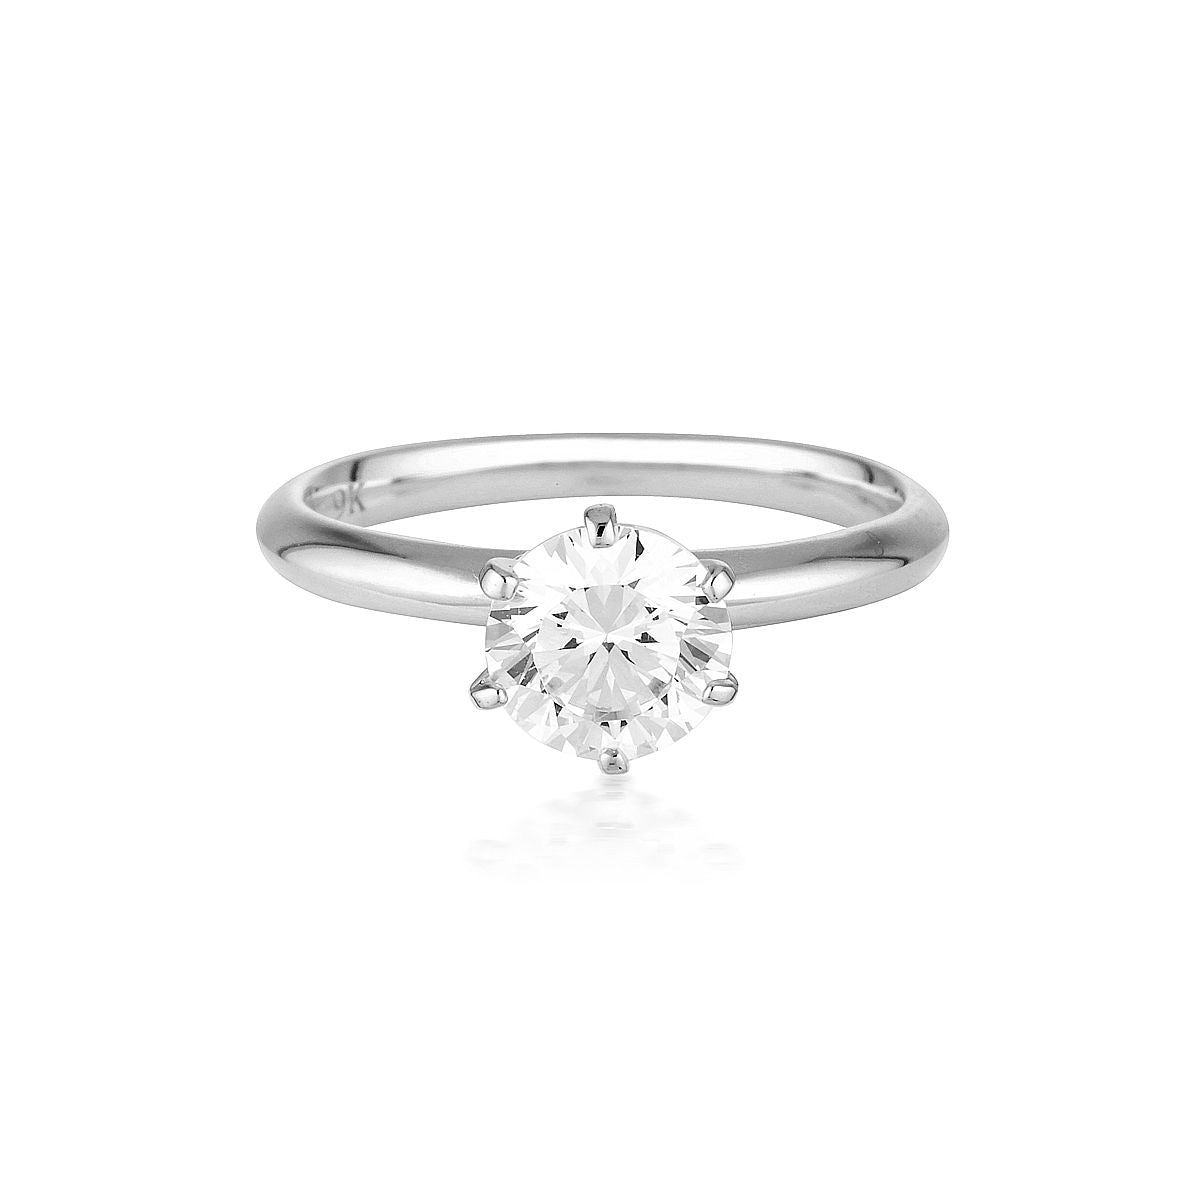 Georgini - Round Brilliant Cut 1.25Ct Cubic Zirconia Solitaire With Knife Edge Band In 9Ct White Gold